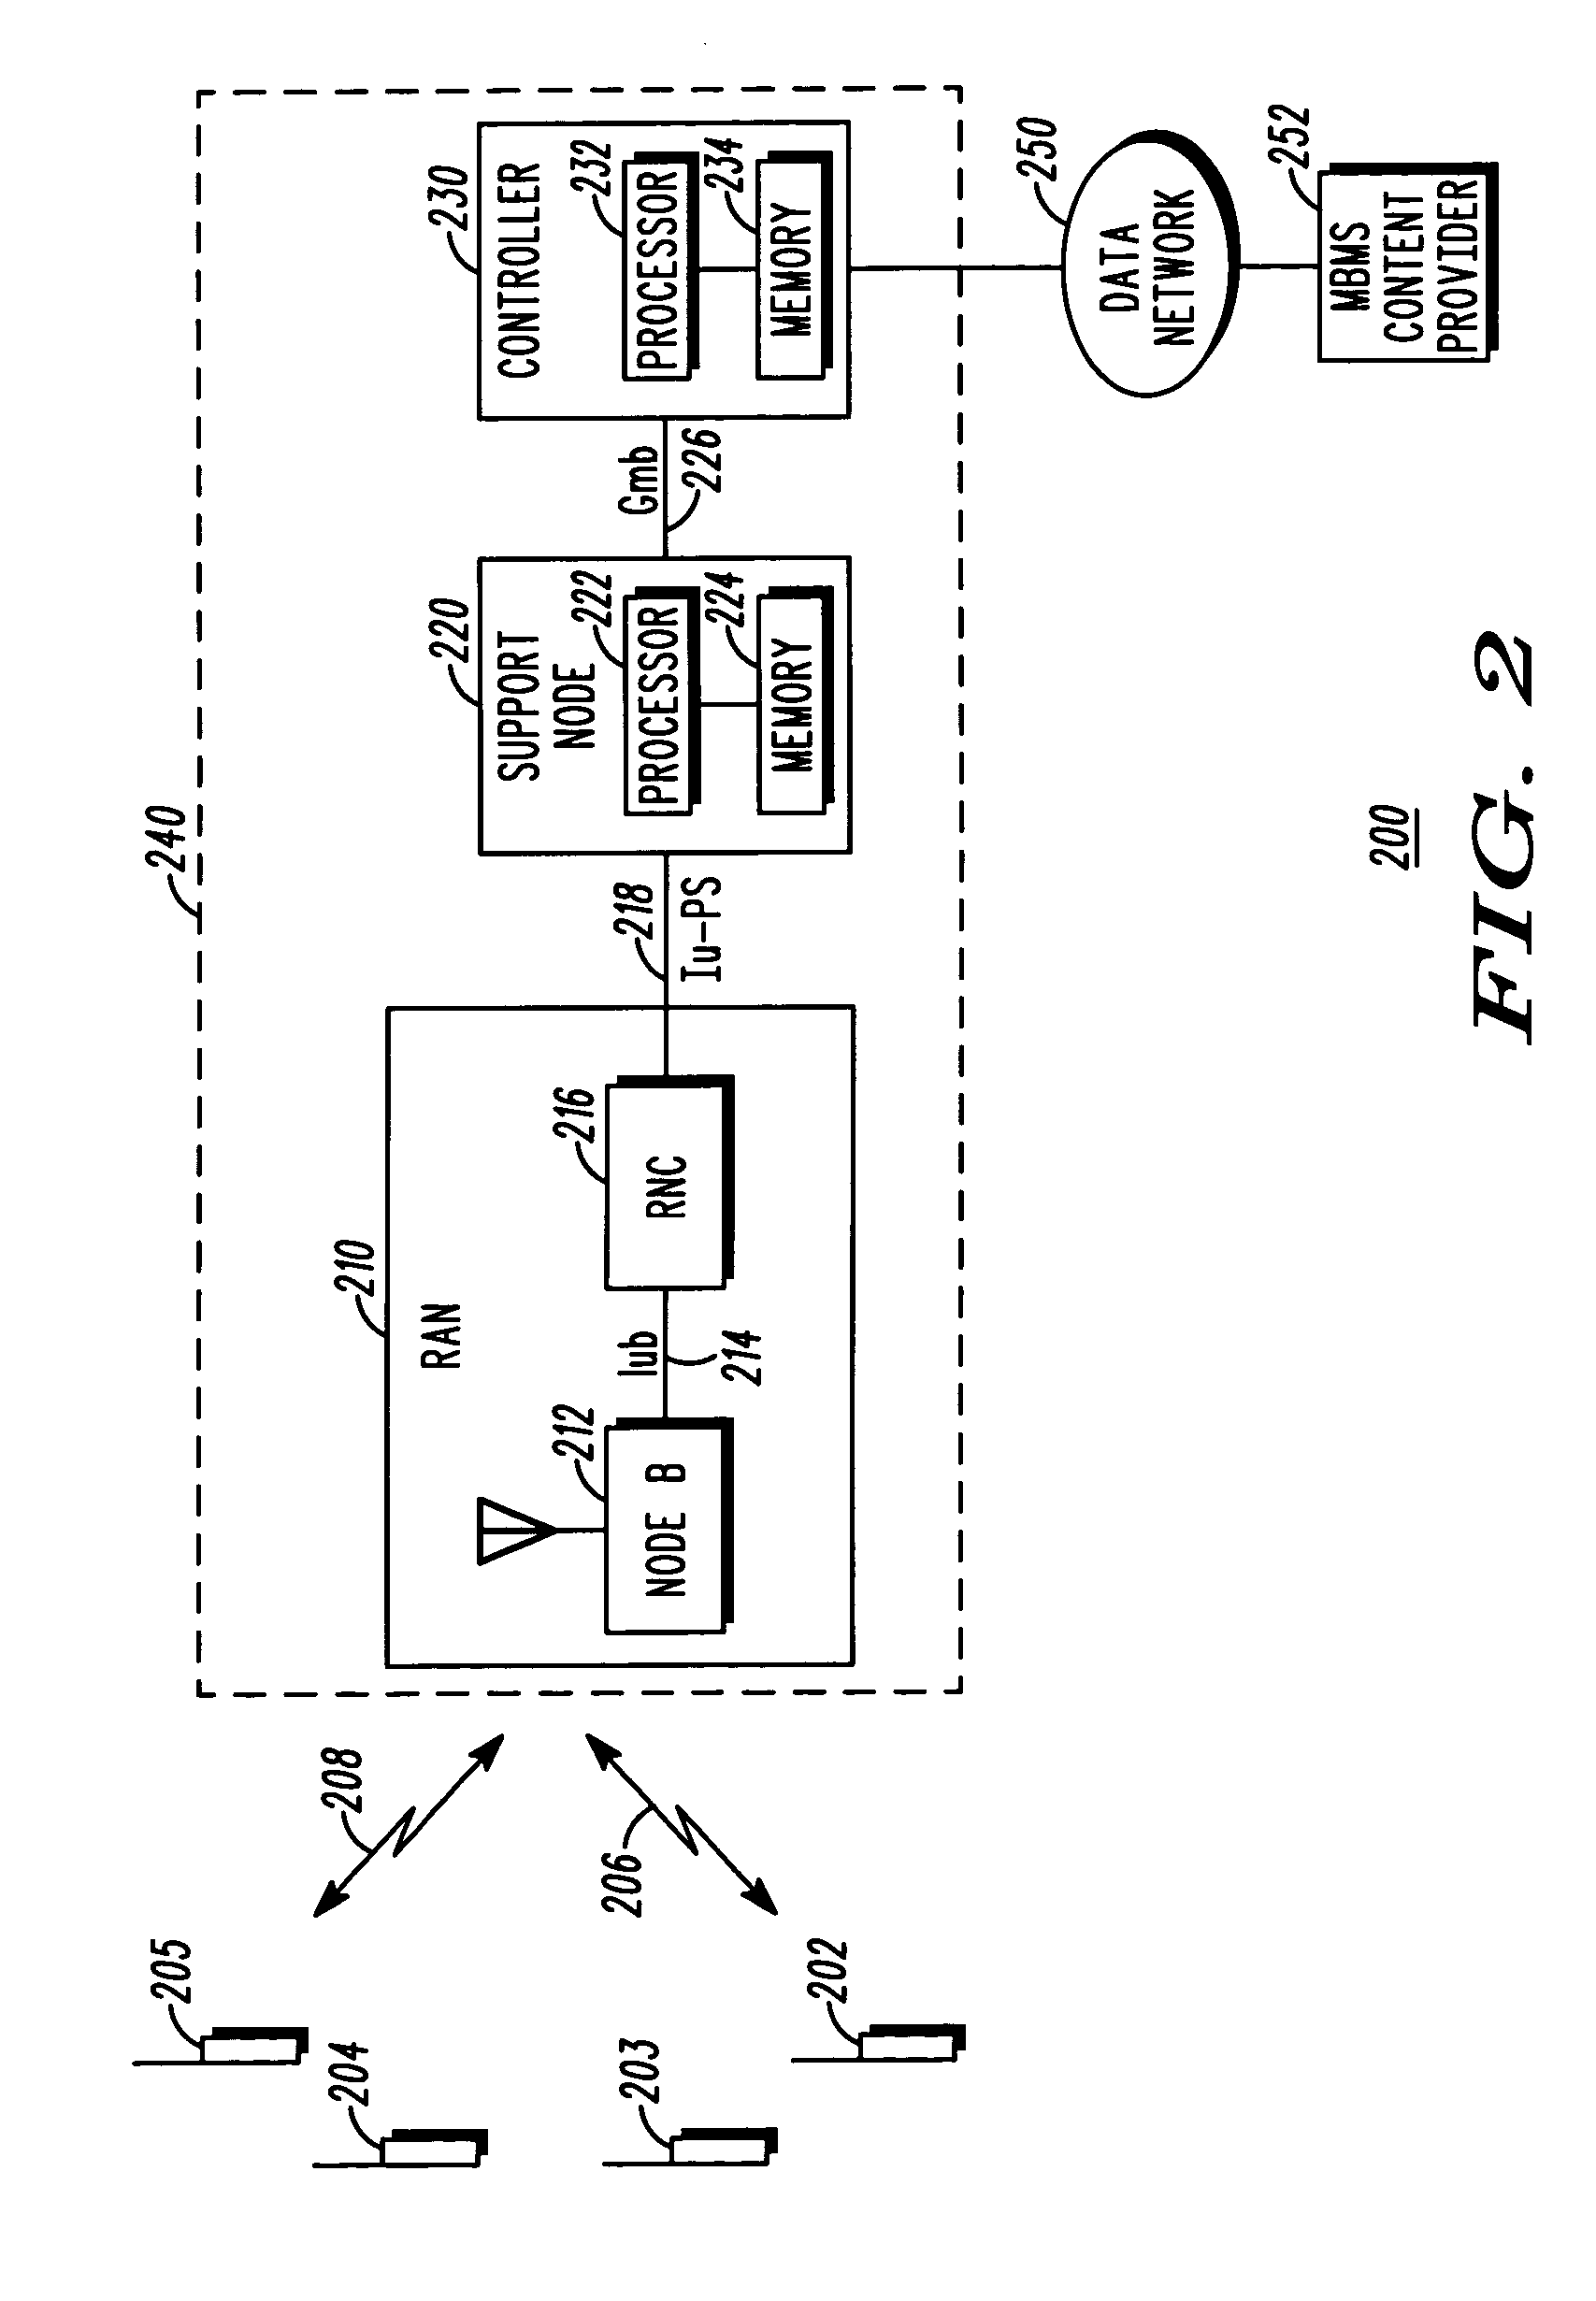 Method and apparatus for providing multimedia broadcast multicast service data to a subscriber to a multimedia broadcast multicast service